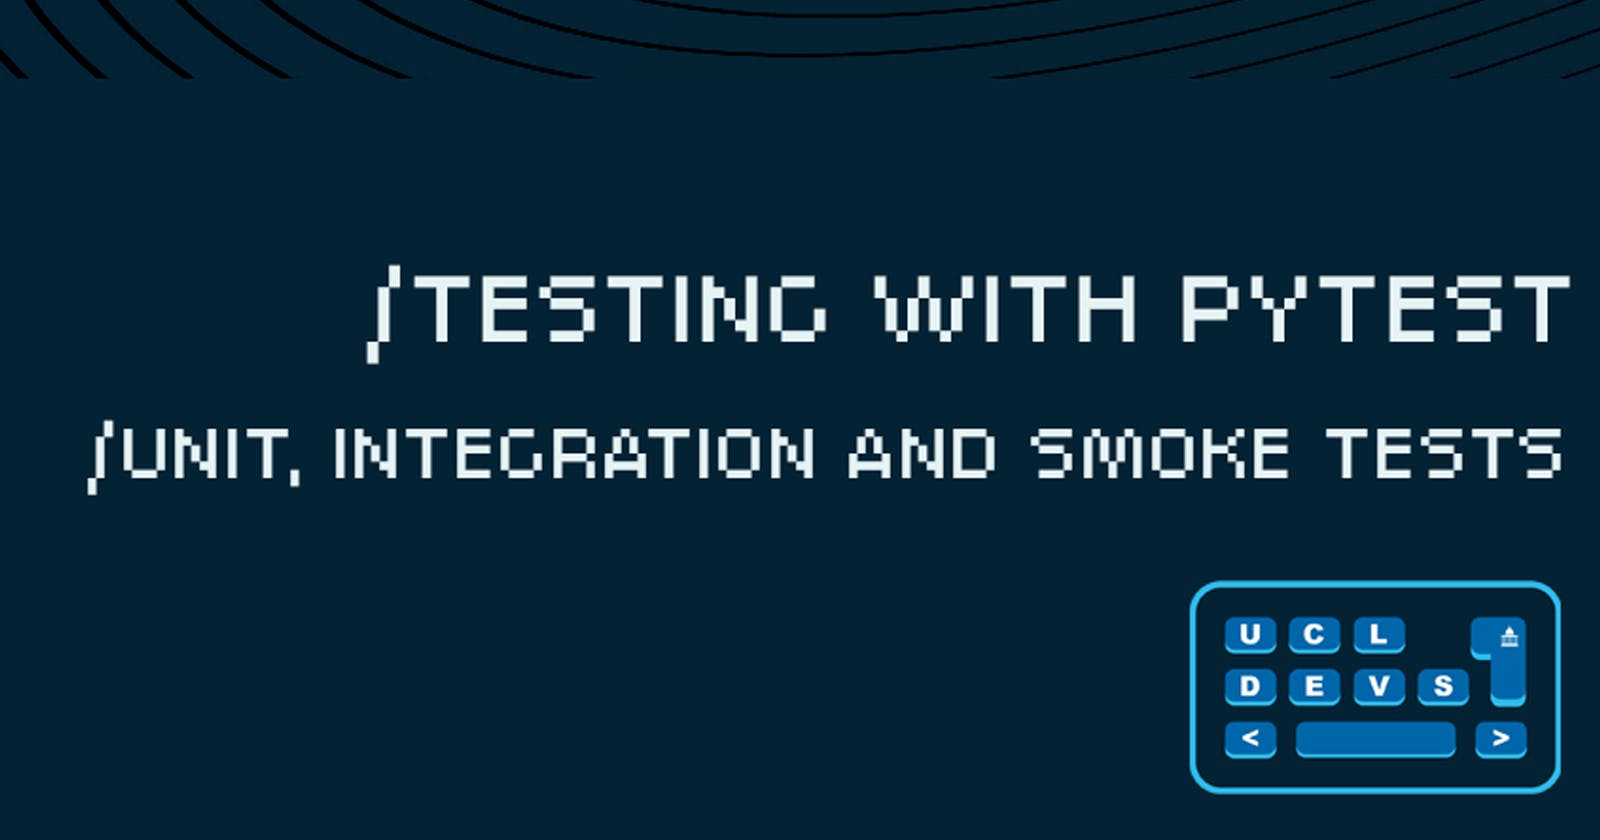 Testing with pytest. Unit, Integration and Smoke tests.